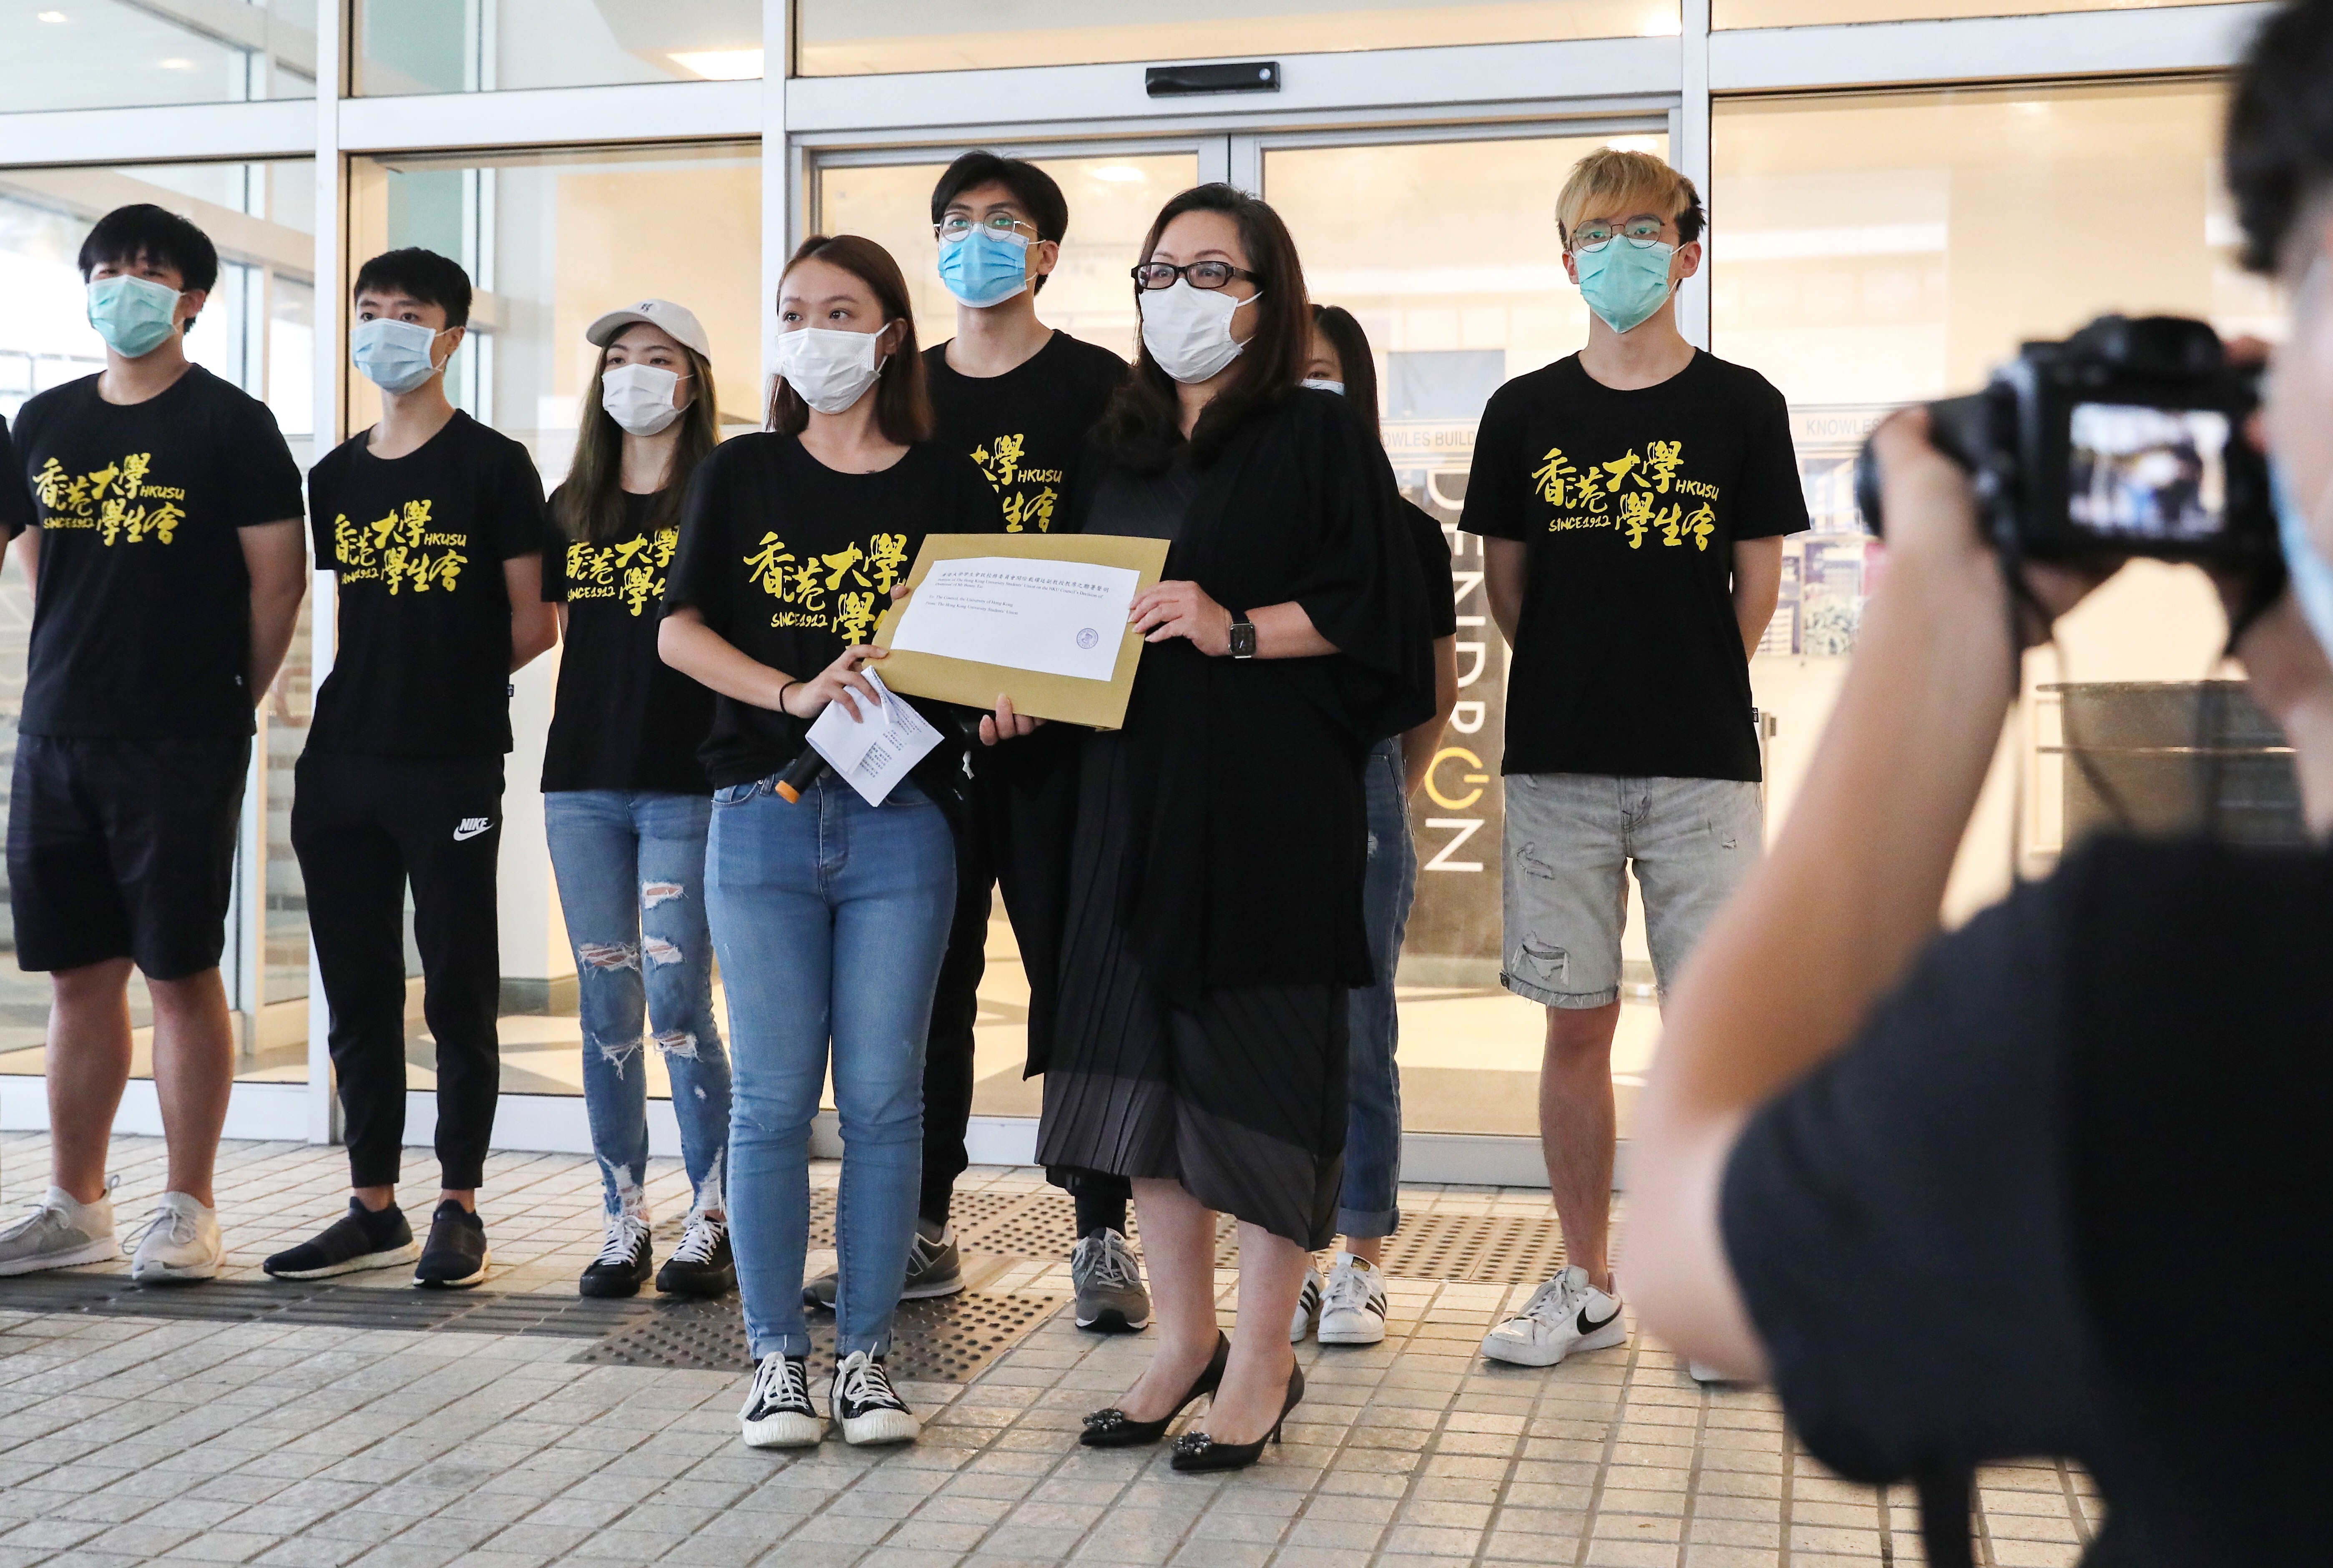 HKU student union president Edy Jeh says the signatures collected have proved that the council members who voted to dismiss legal scholar Benny Tai were ‘only a minority’. Photo: Nora Tam